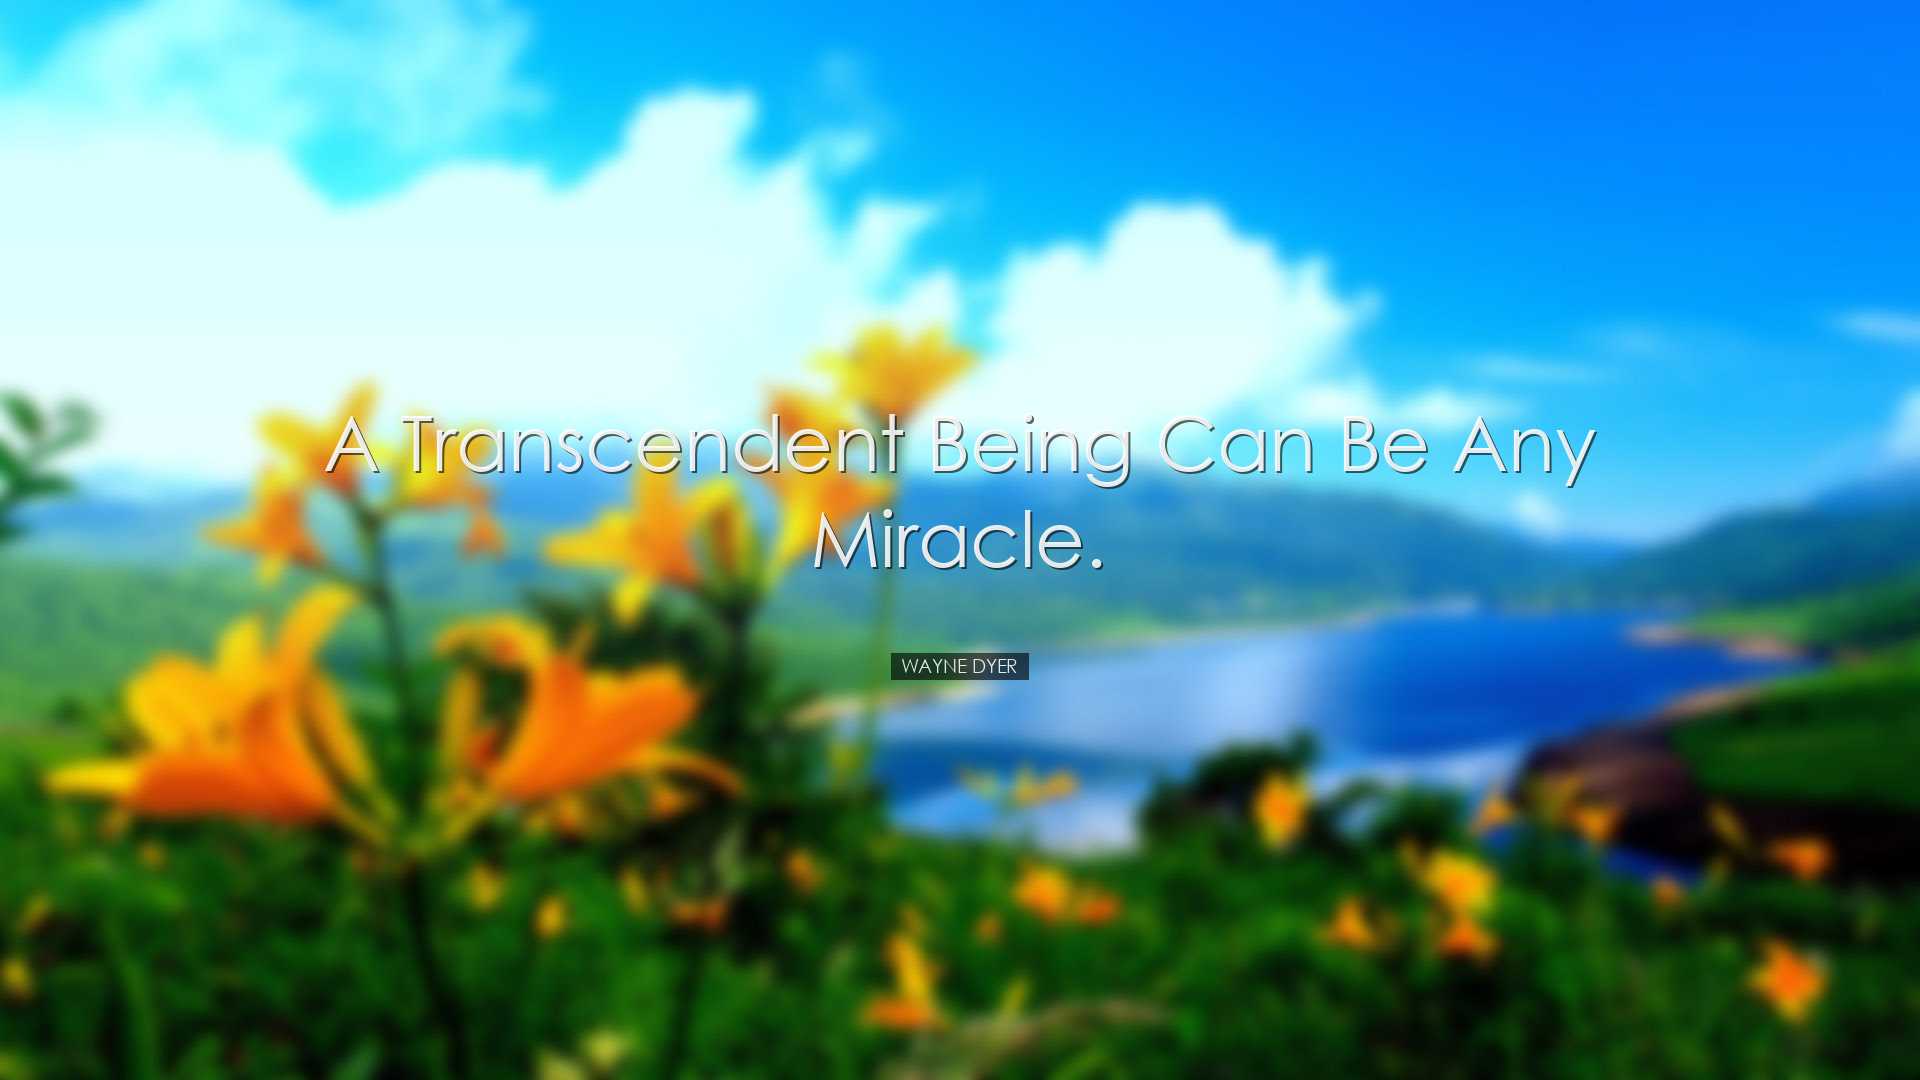 A transcendent being can be any miracle. - Wayne Dyer